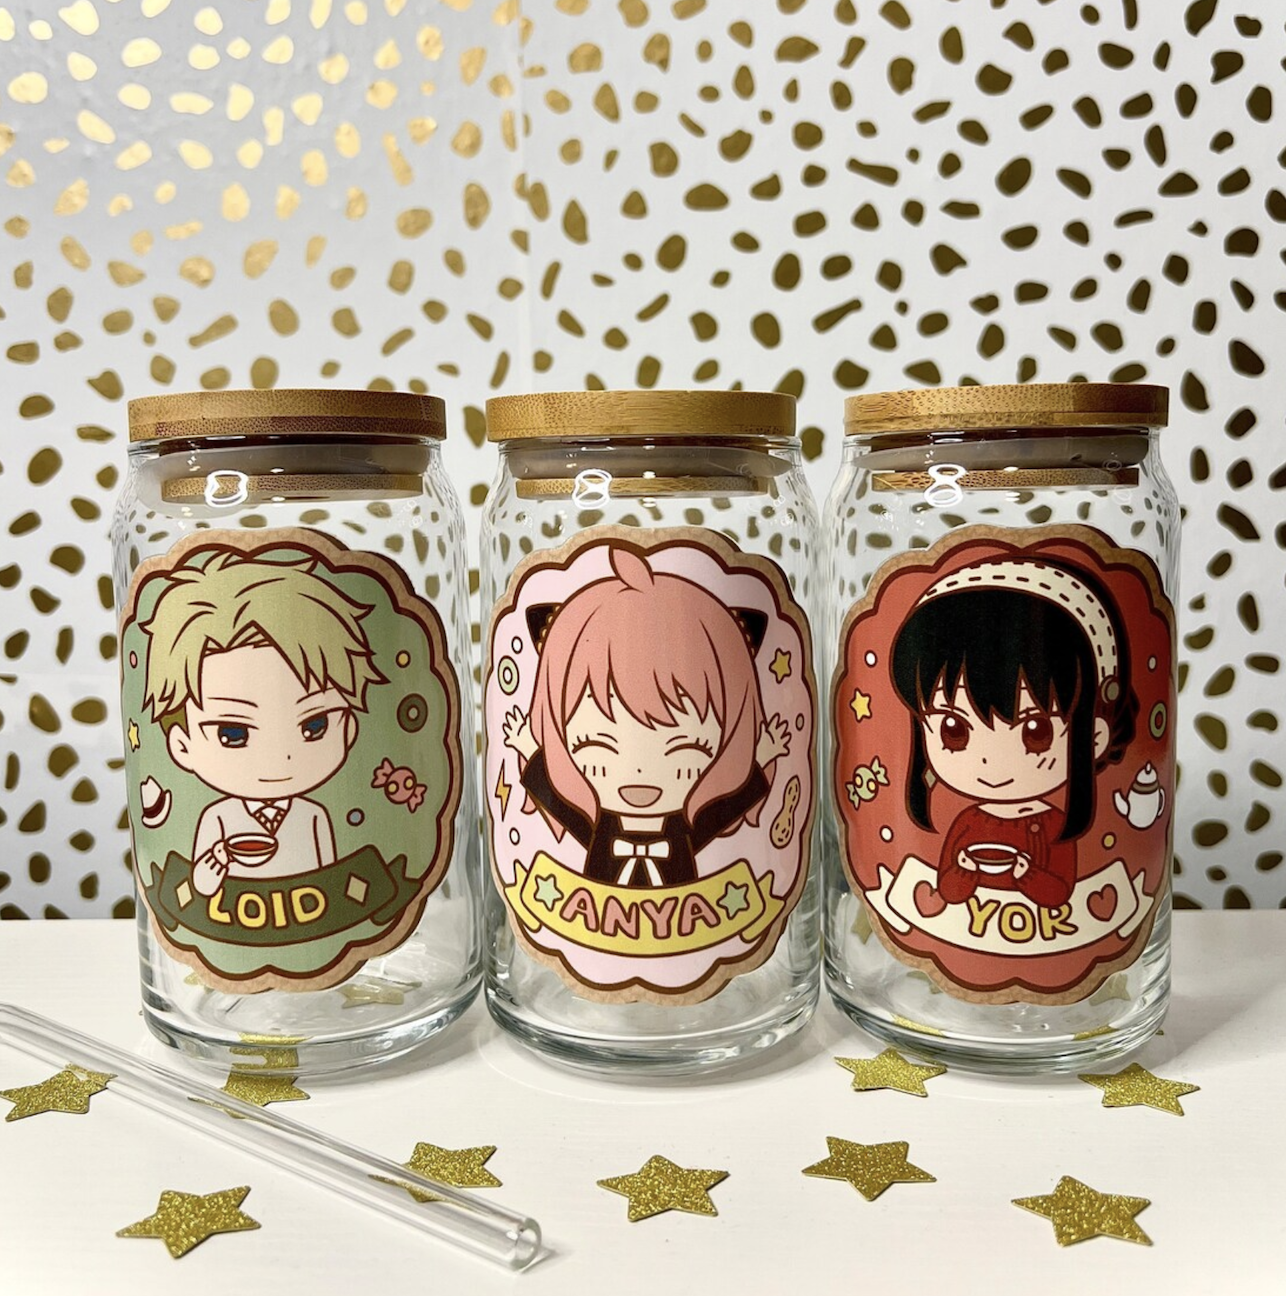 Three illustrated character jars labeled Loid, Anya, and Yor from anime &quot;Spy x Family&quot;